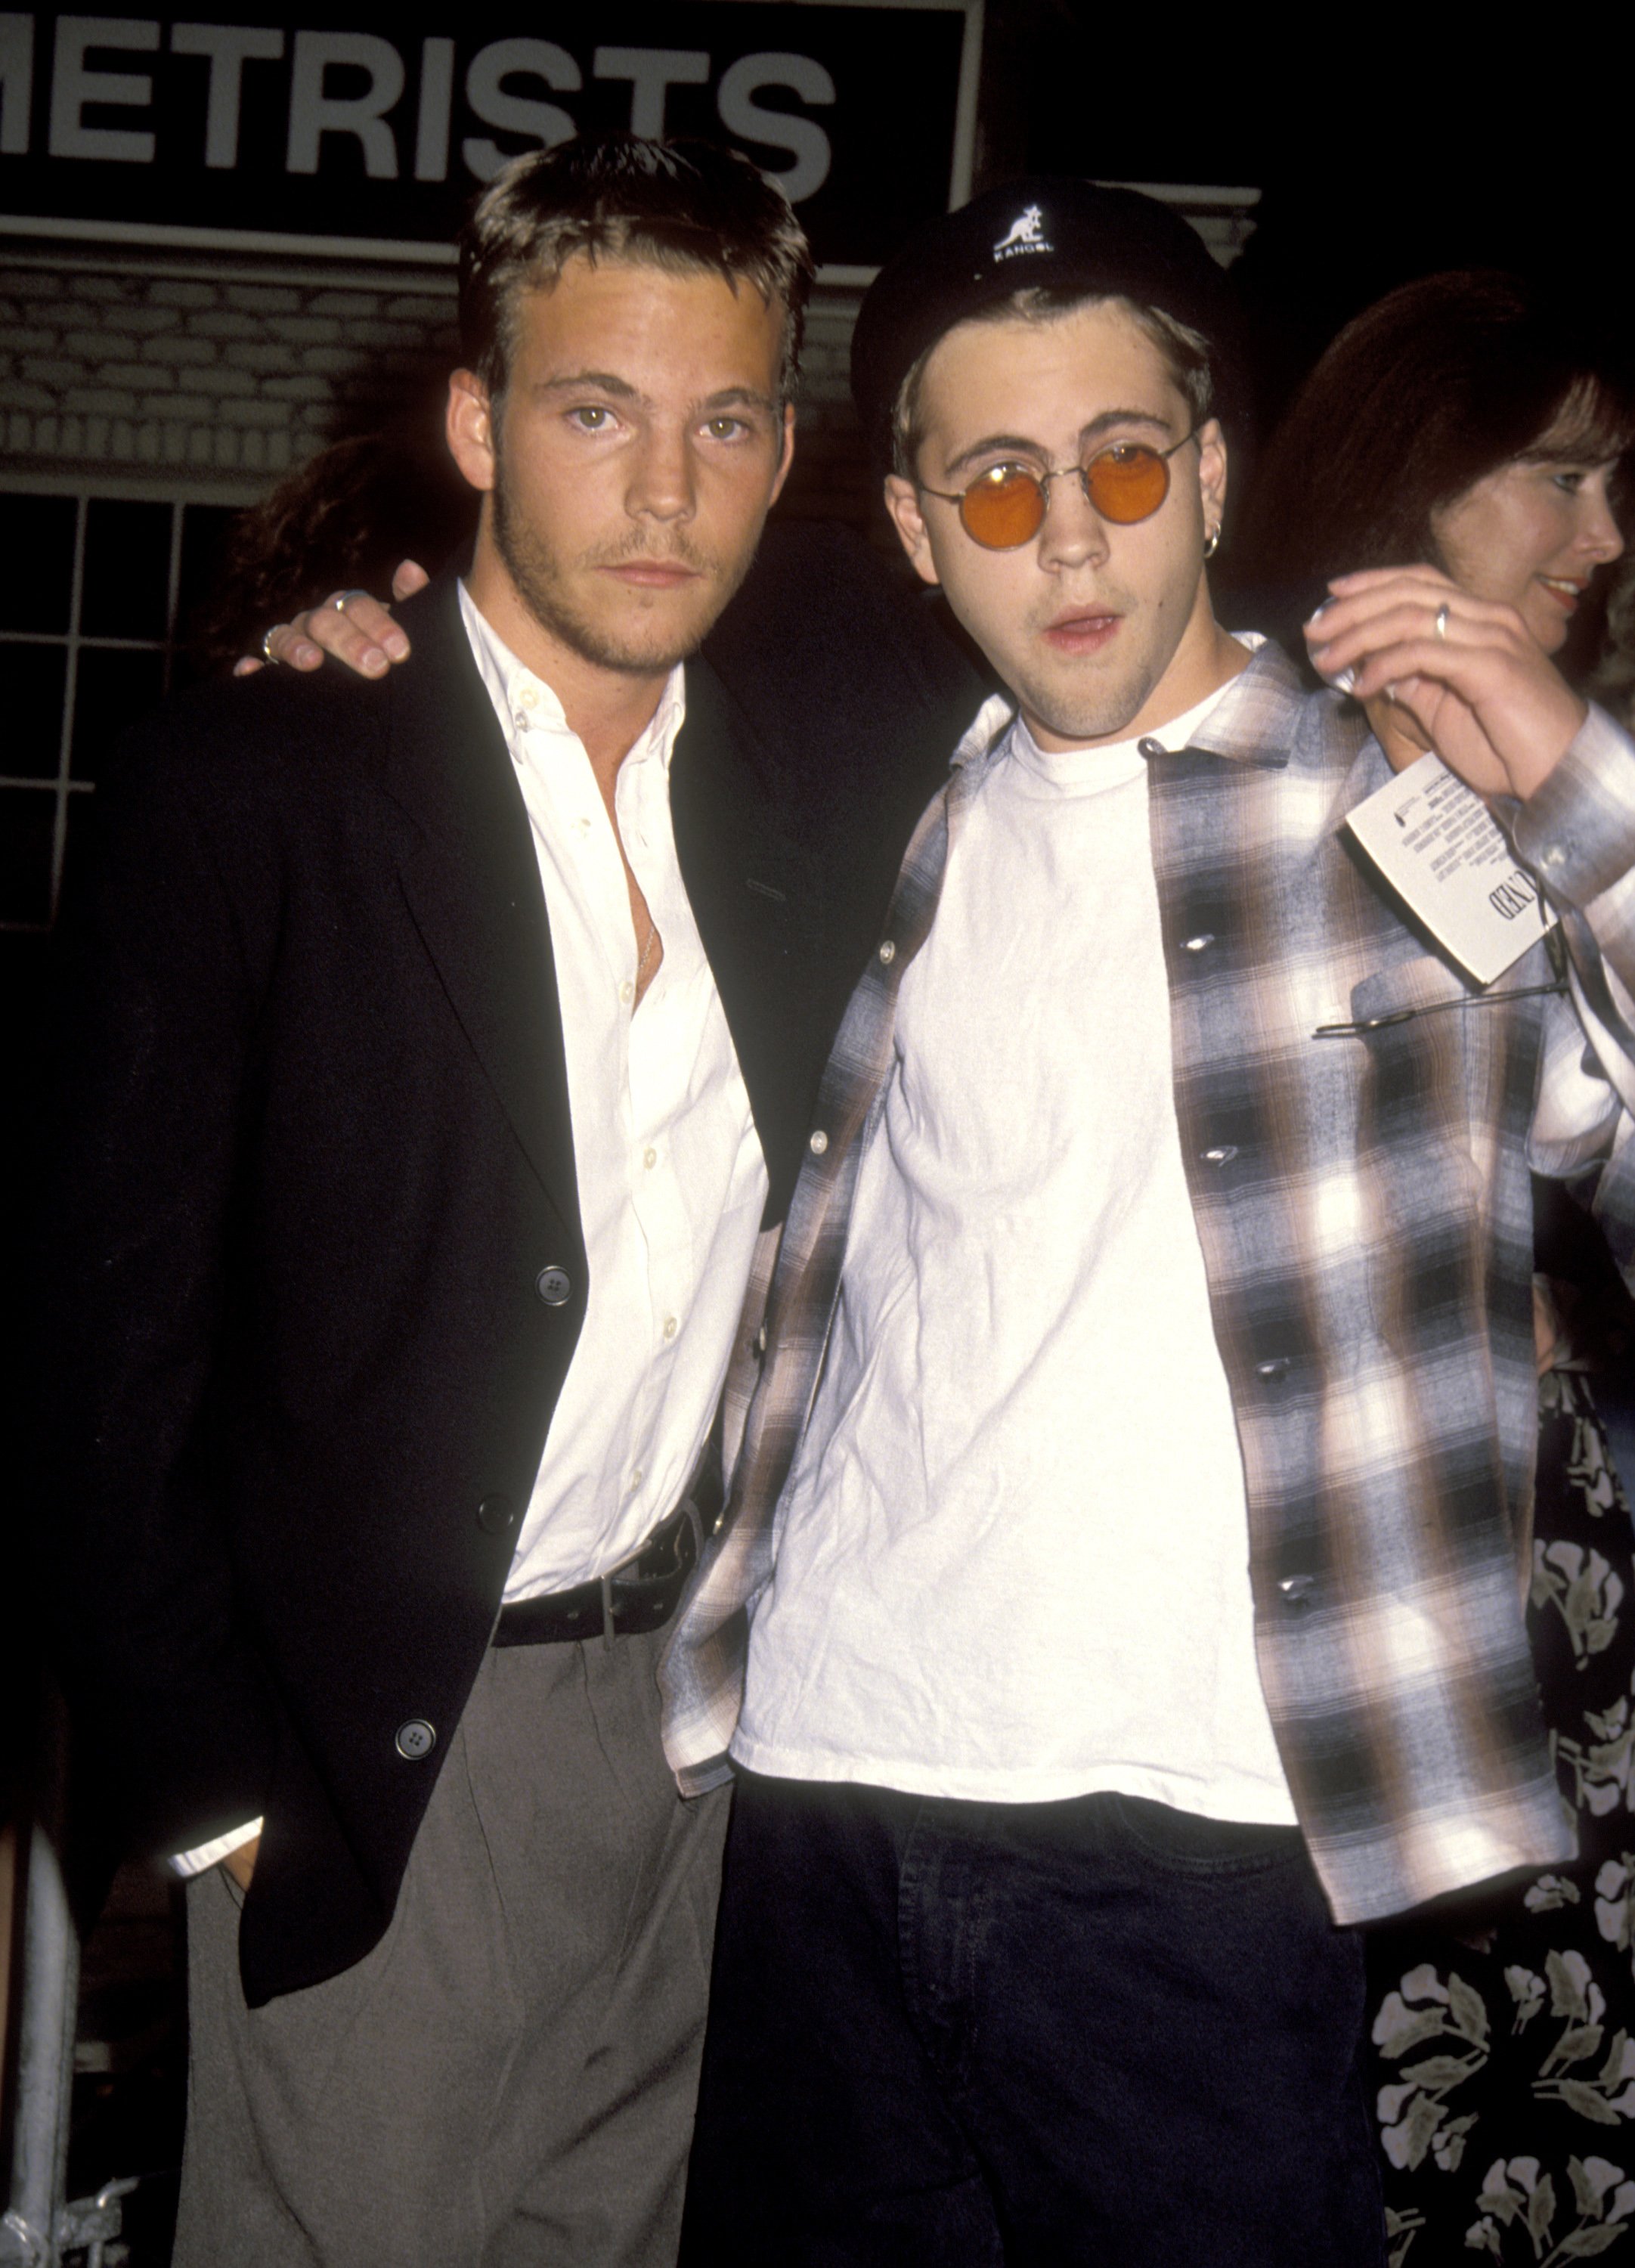 Stephen Dorff and Brother Andrew Dorff at the "Stay Tuned" Hollywood Screening - August 13, 1992 | Photo by Ron Galella Collection via Getty Images